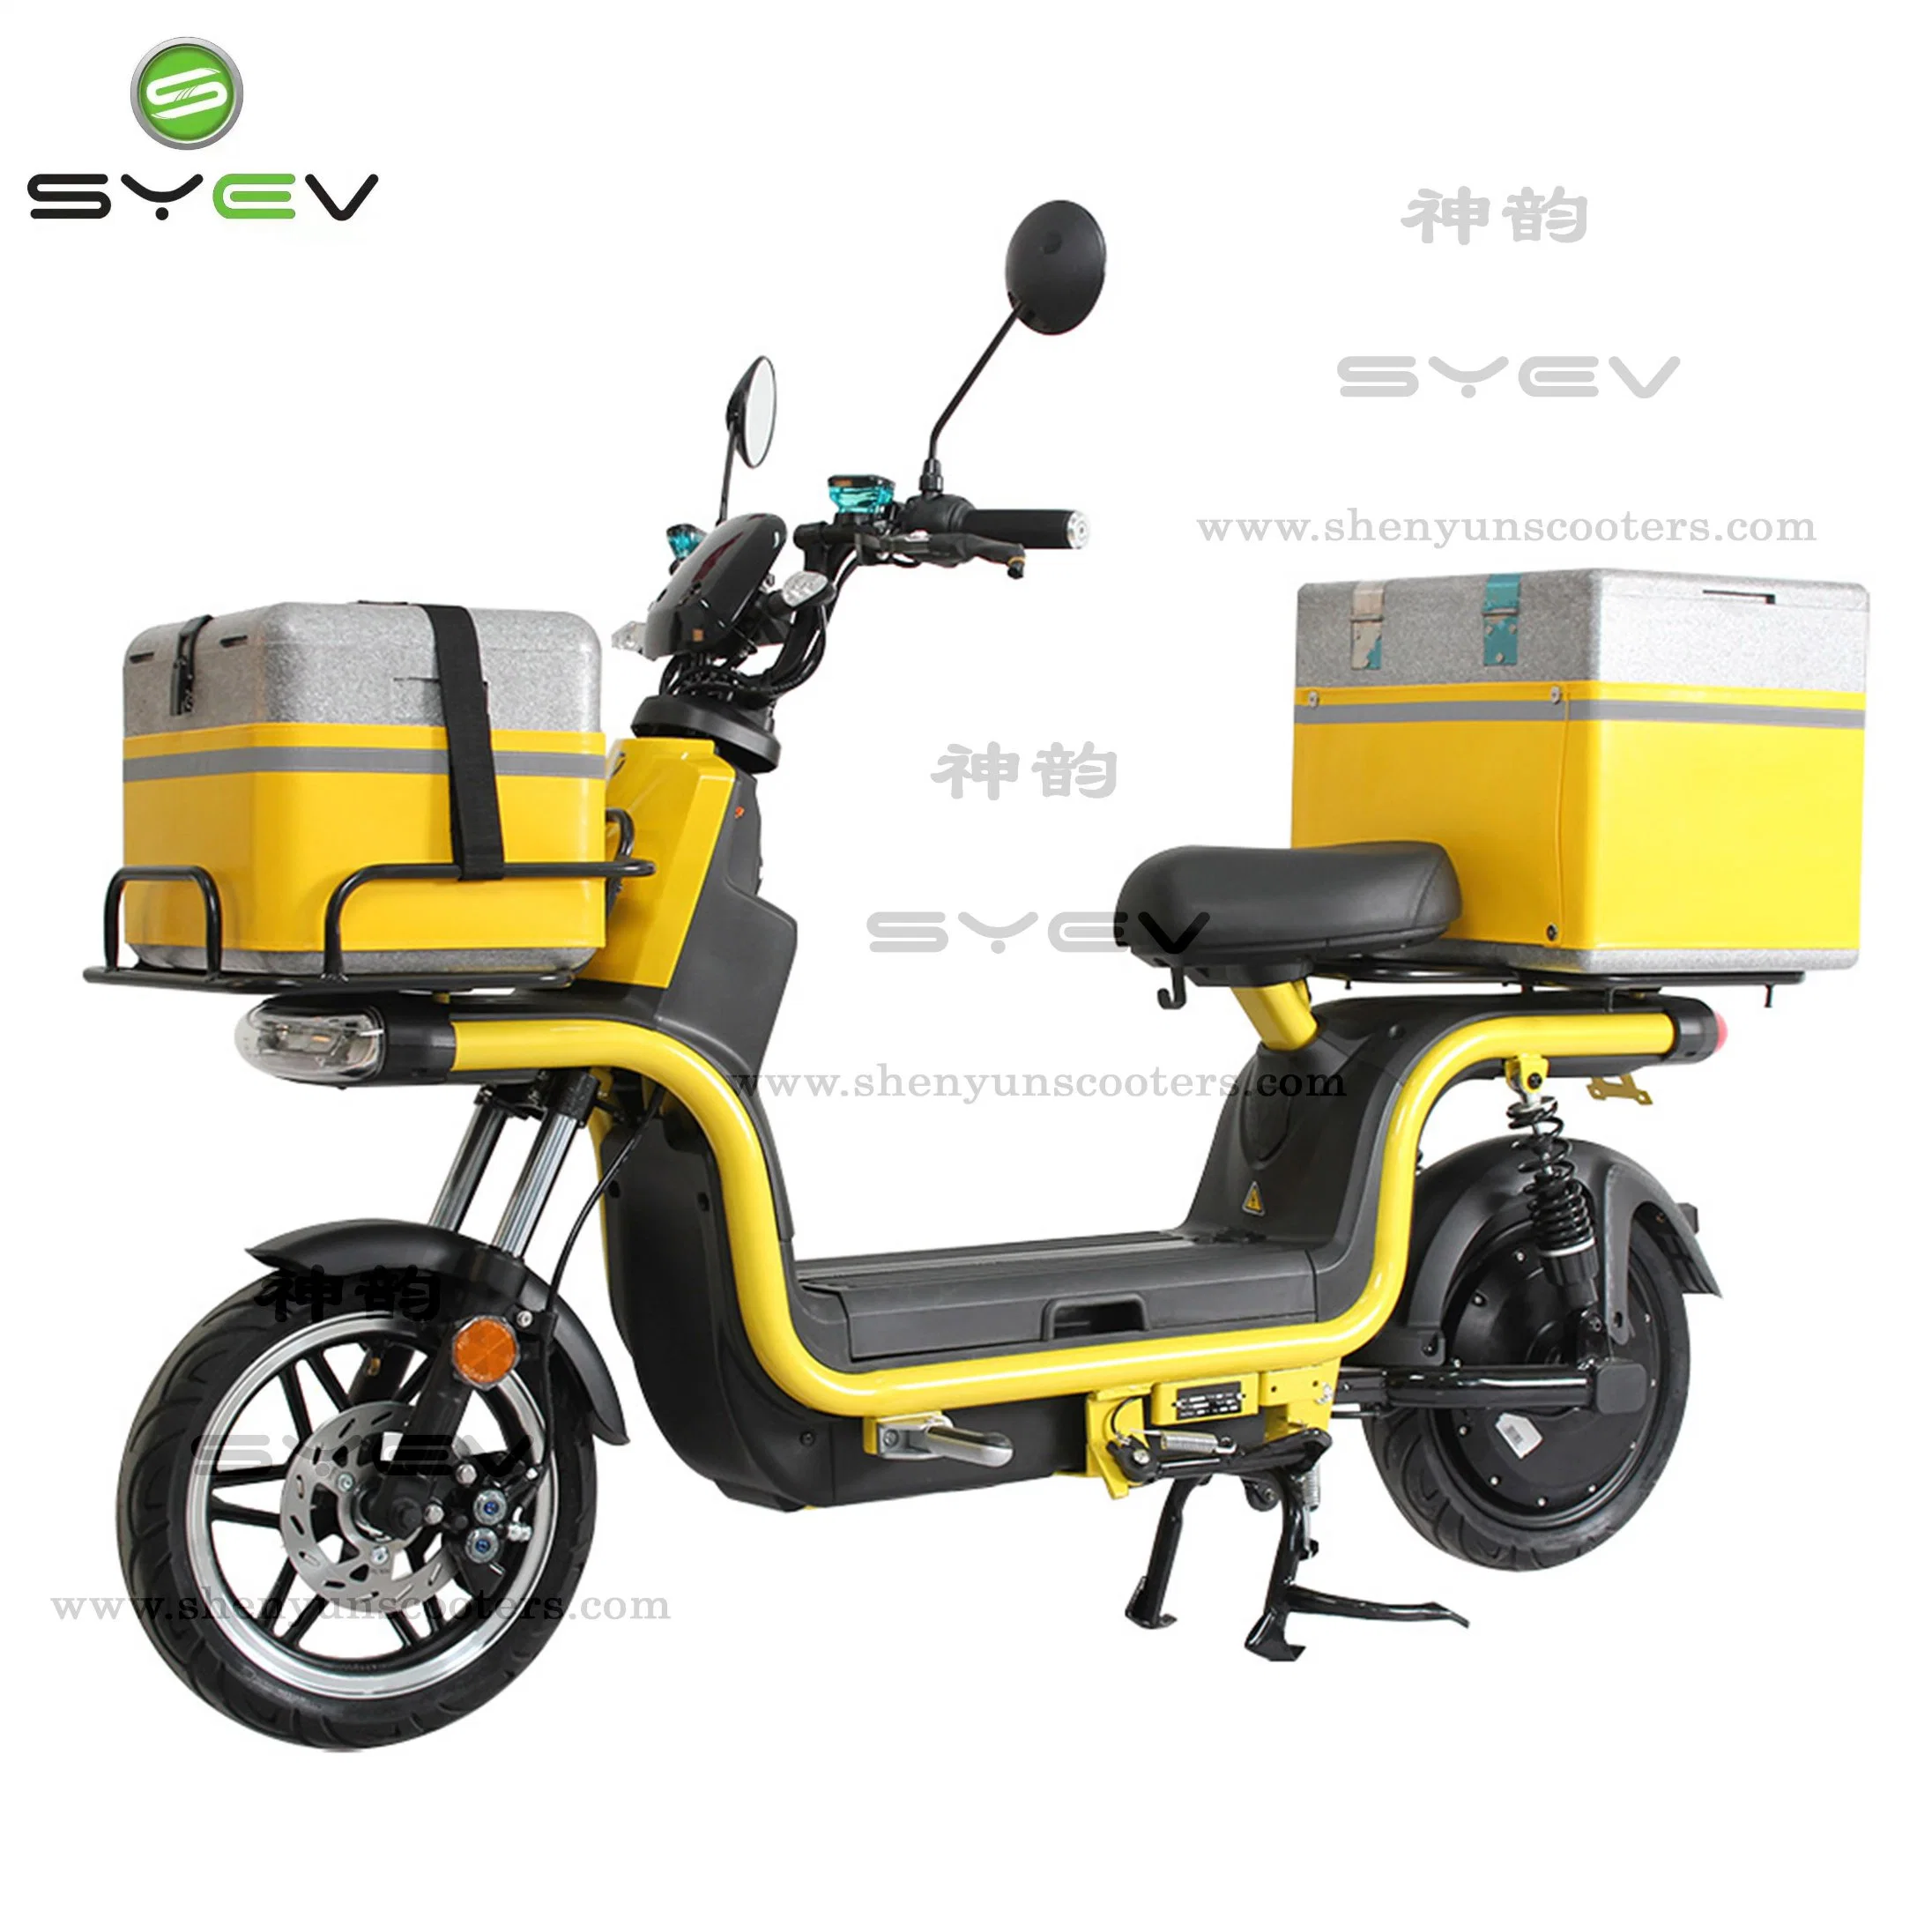 1200W High Speed Fast Food Delivery Scooter Delivery E-Bike Long Range E-Motorcycle